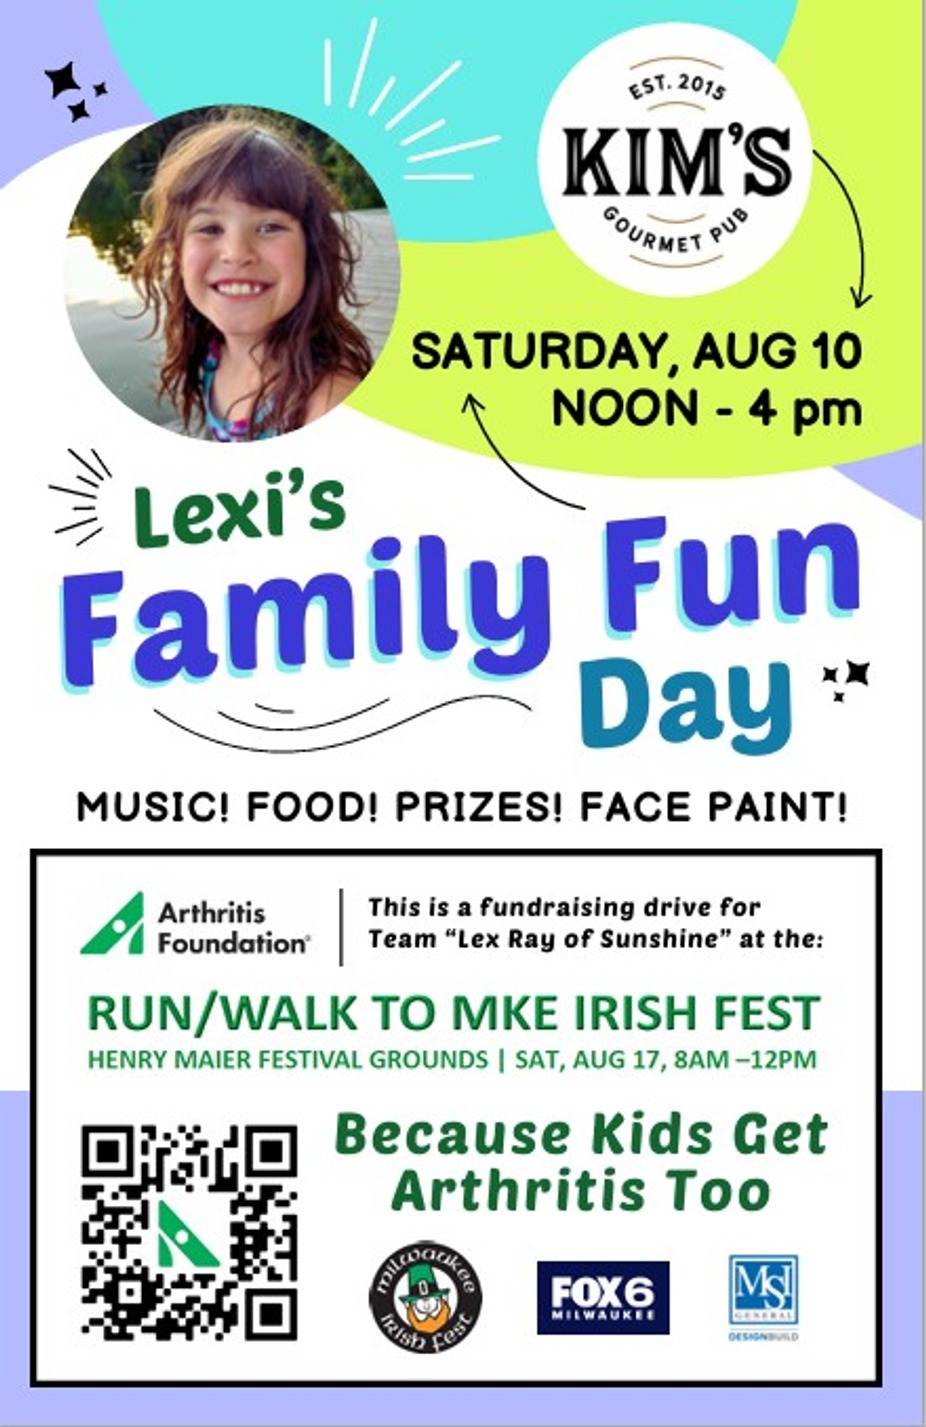 Lexi's Family Fun Day Fundraiser event photo